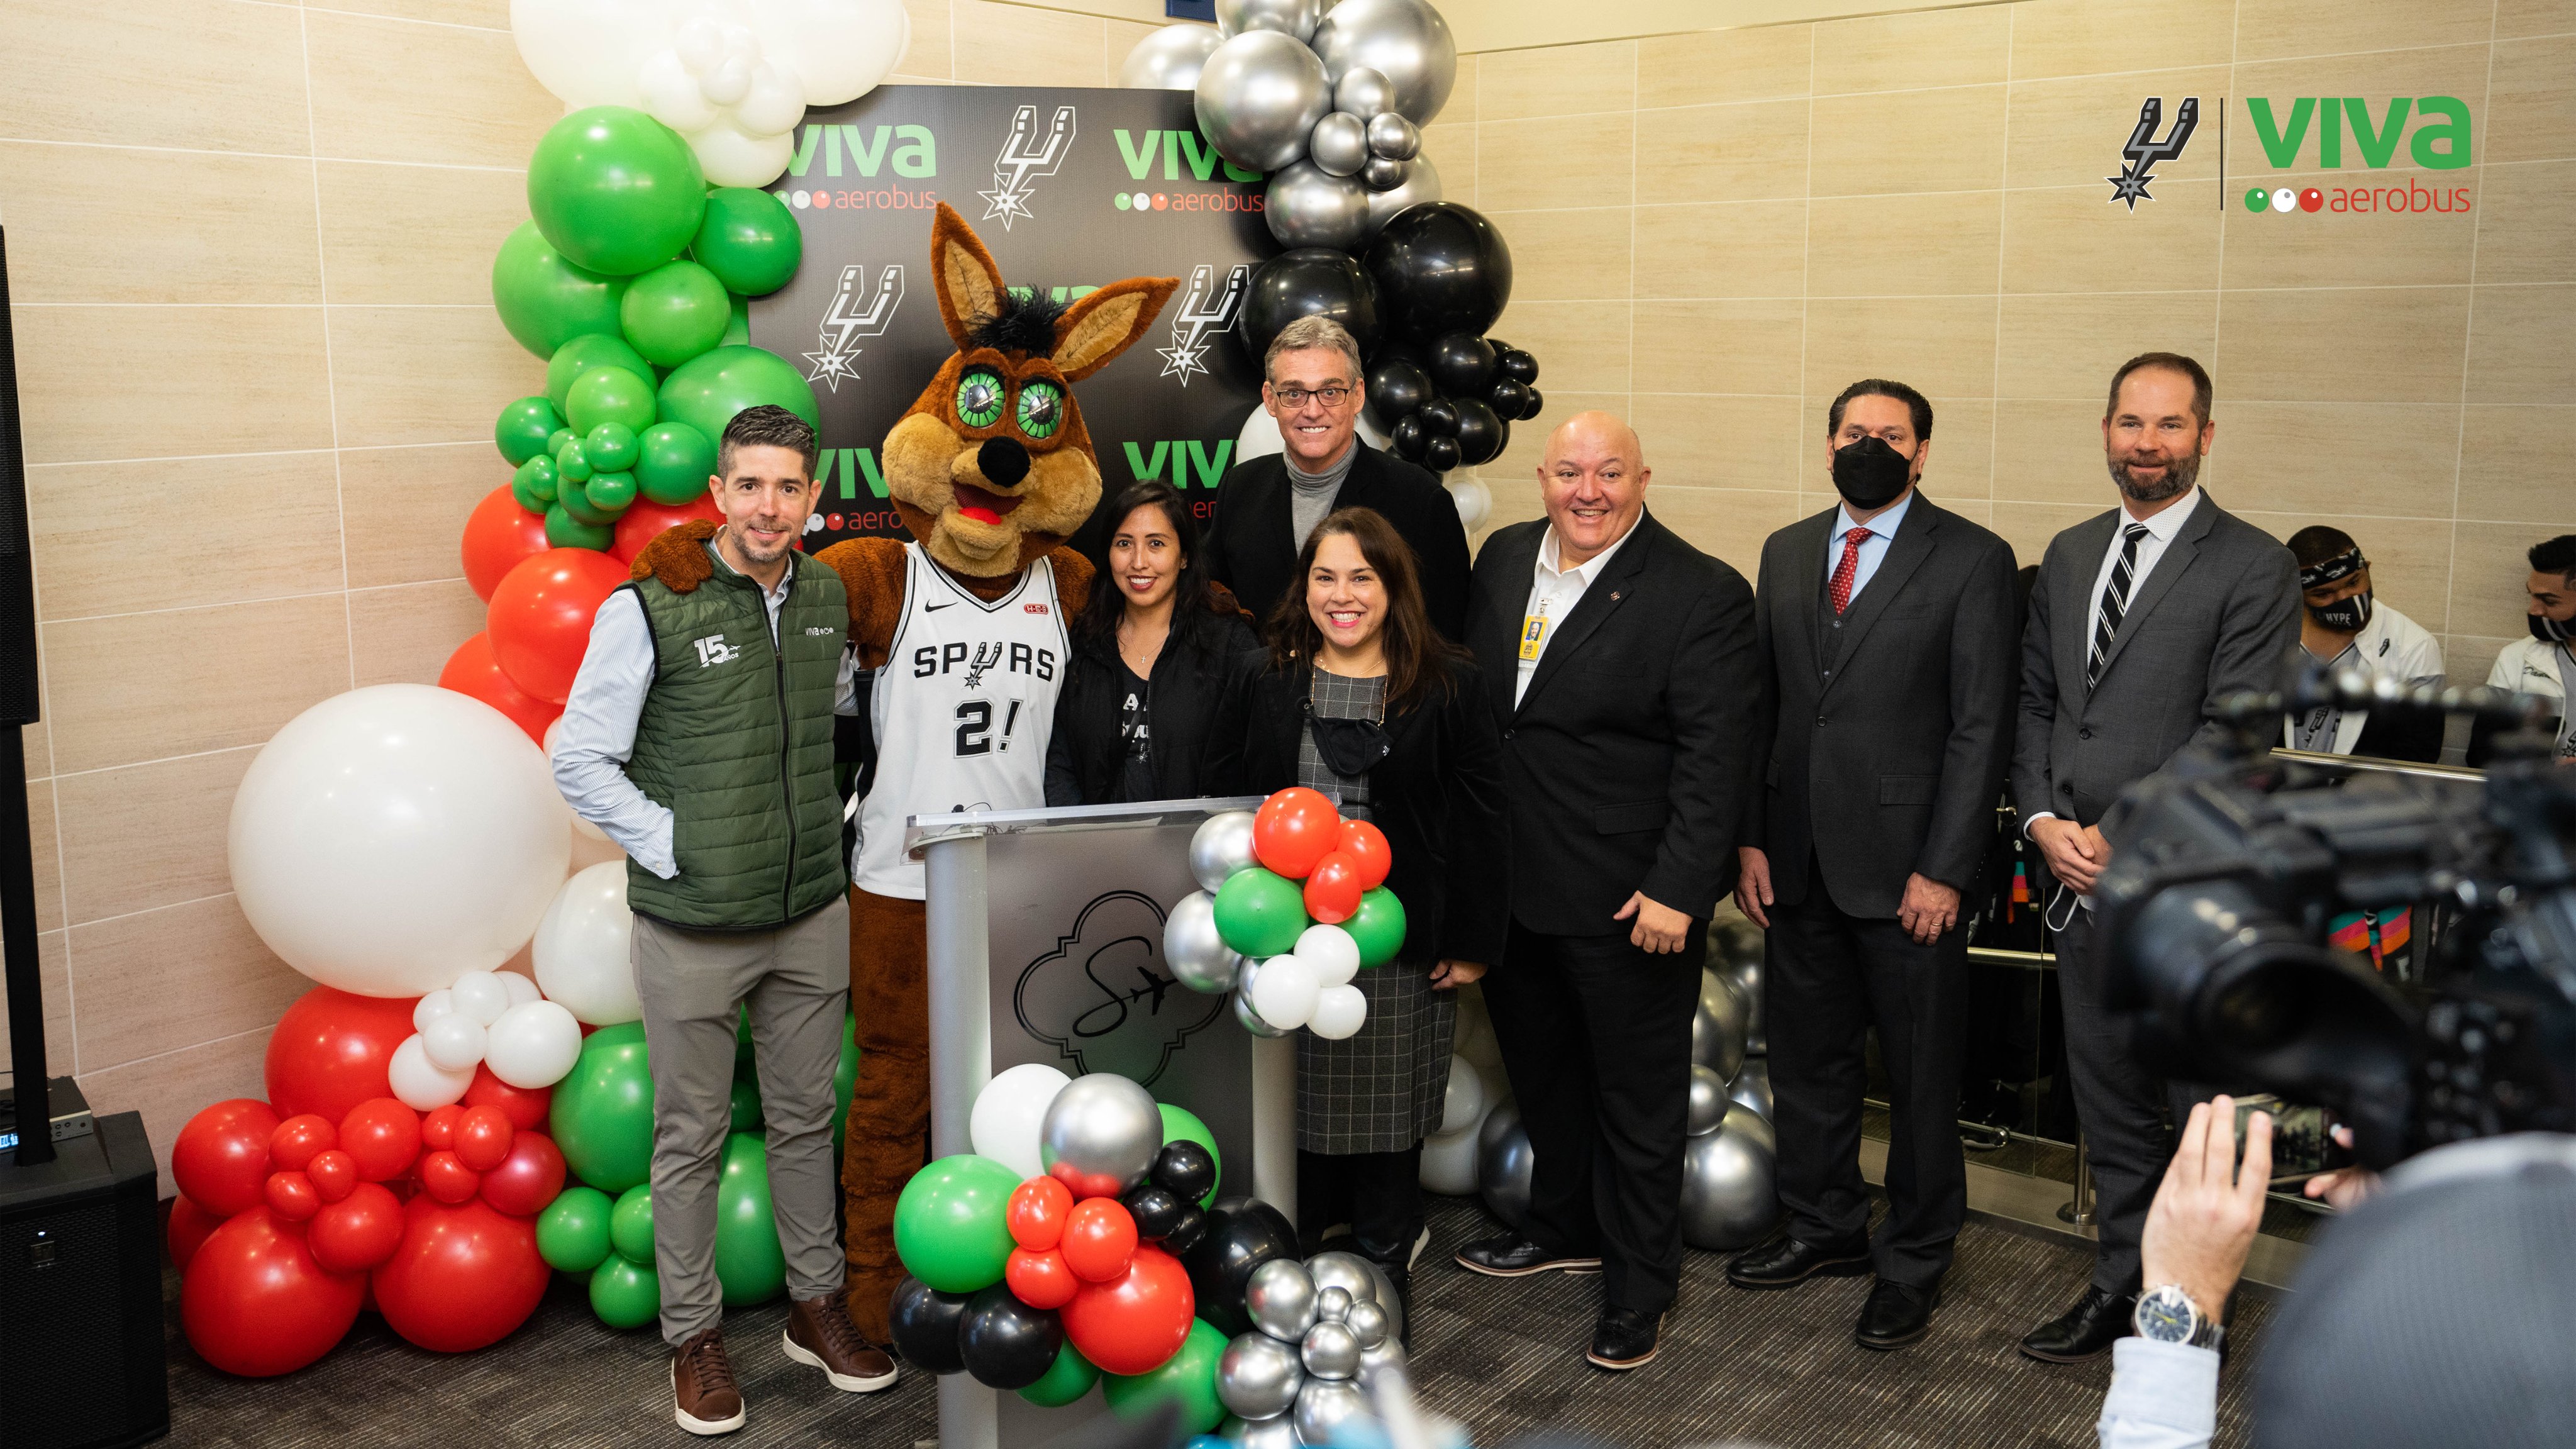 San Antonio Spurs announce partnership with Mexico-based airline